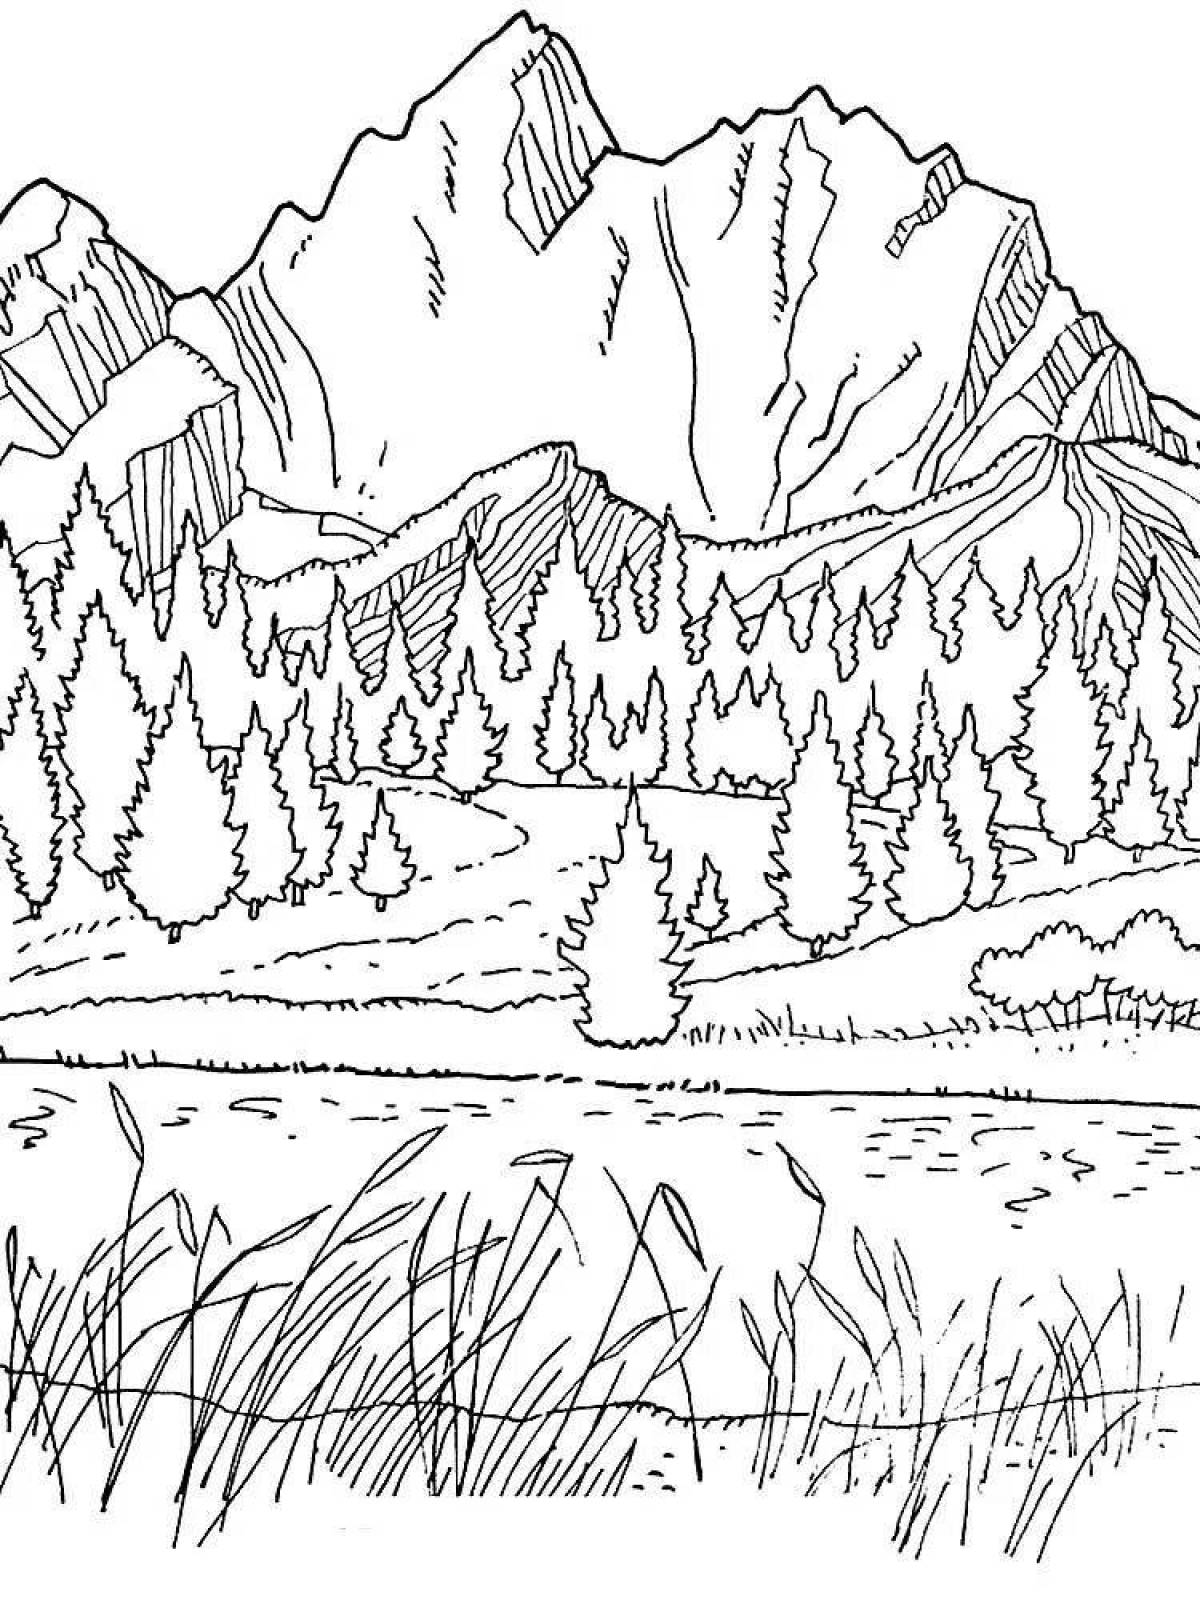 Gorgeous Seal of Nature coloring page